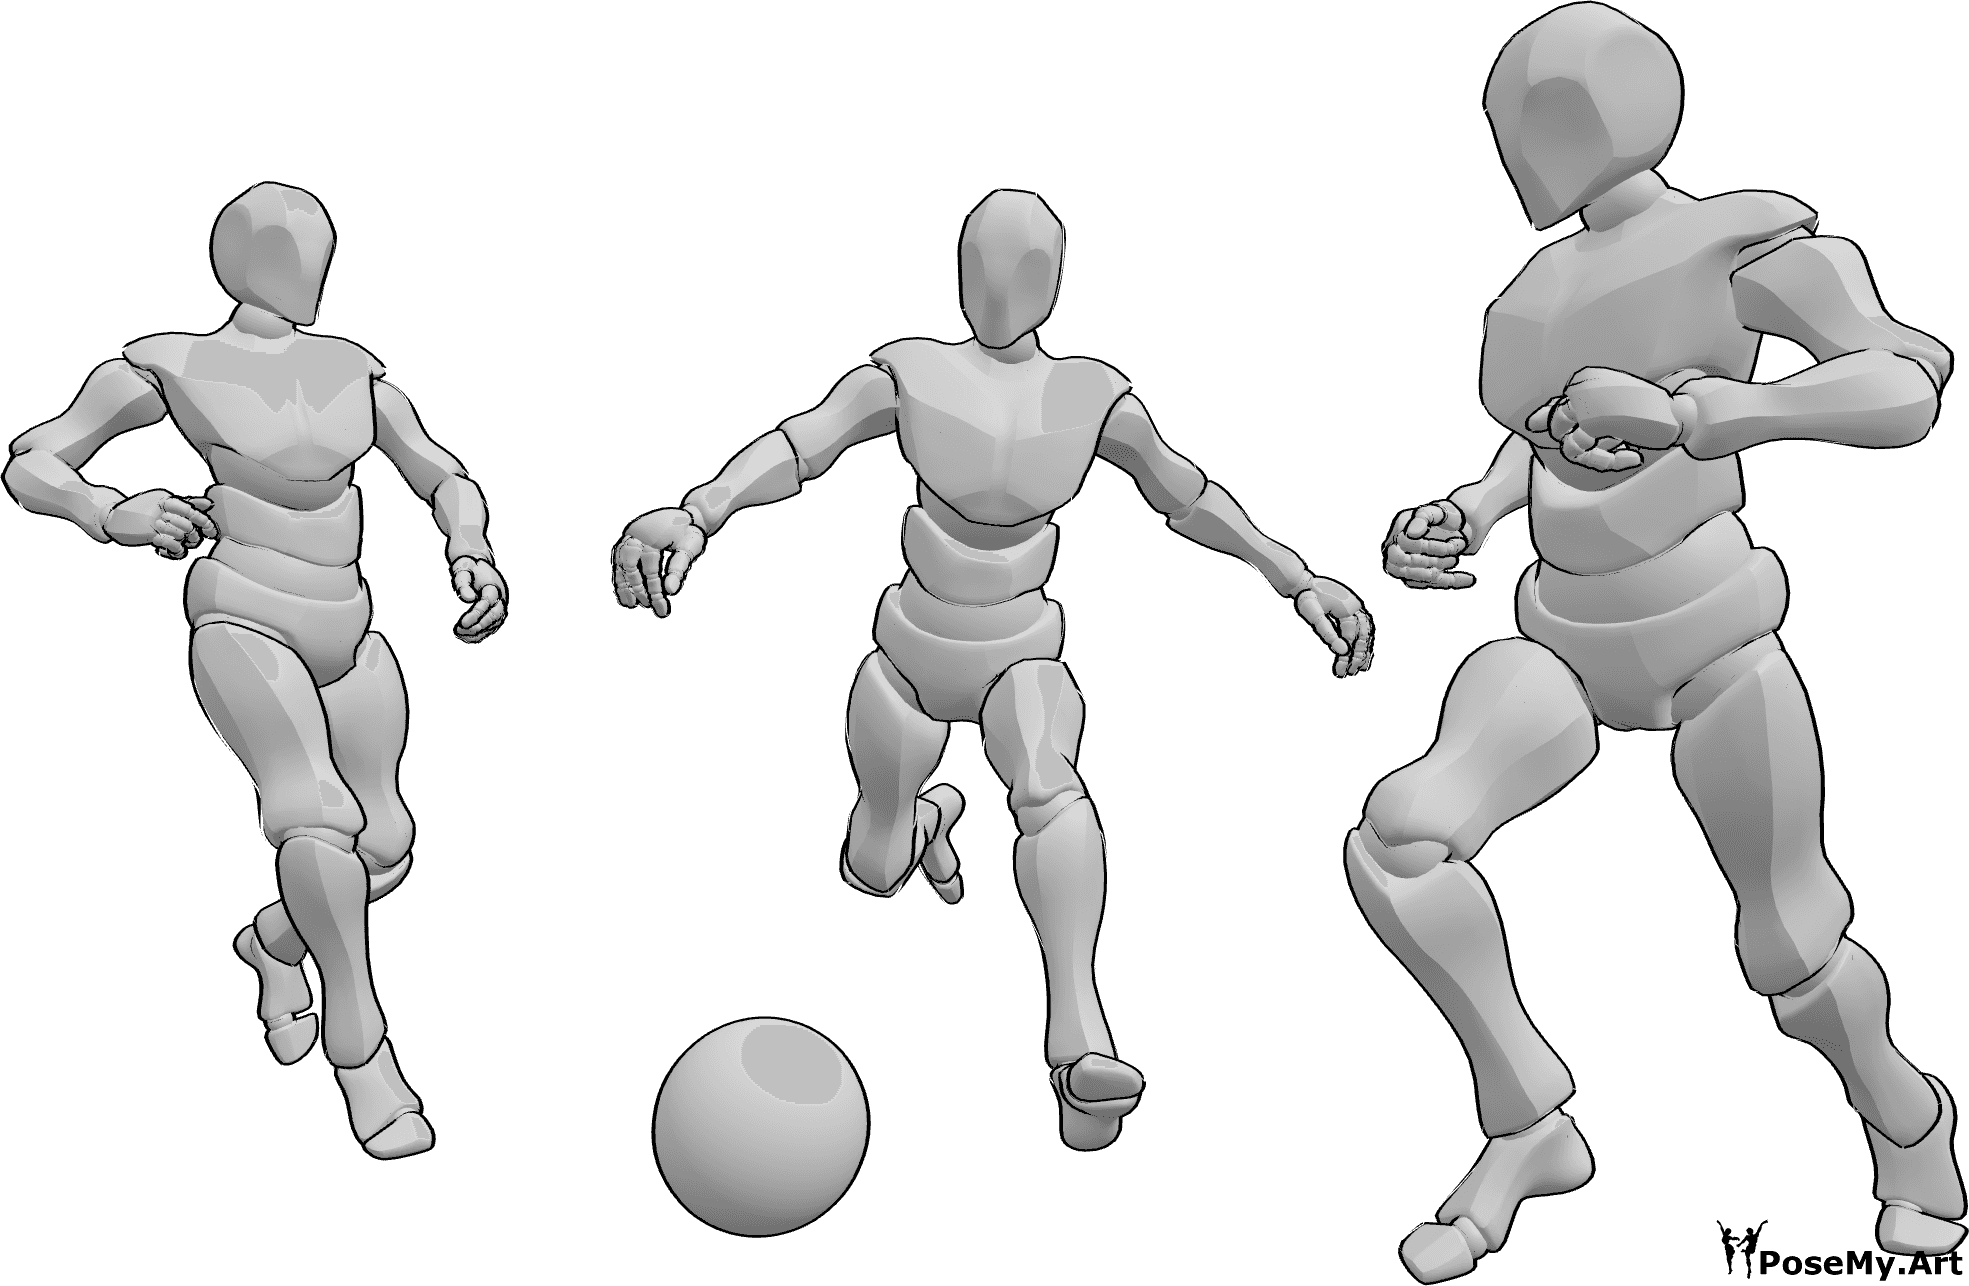 Pose Reference- Male soccer game - Male soccer game scene, 3 females are playing soccer